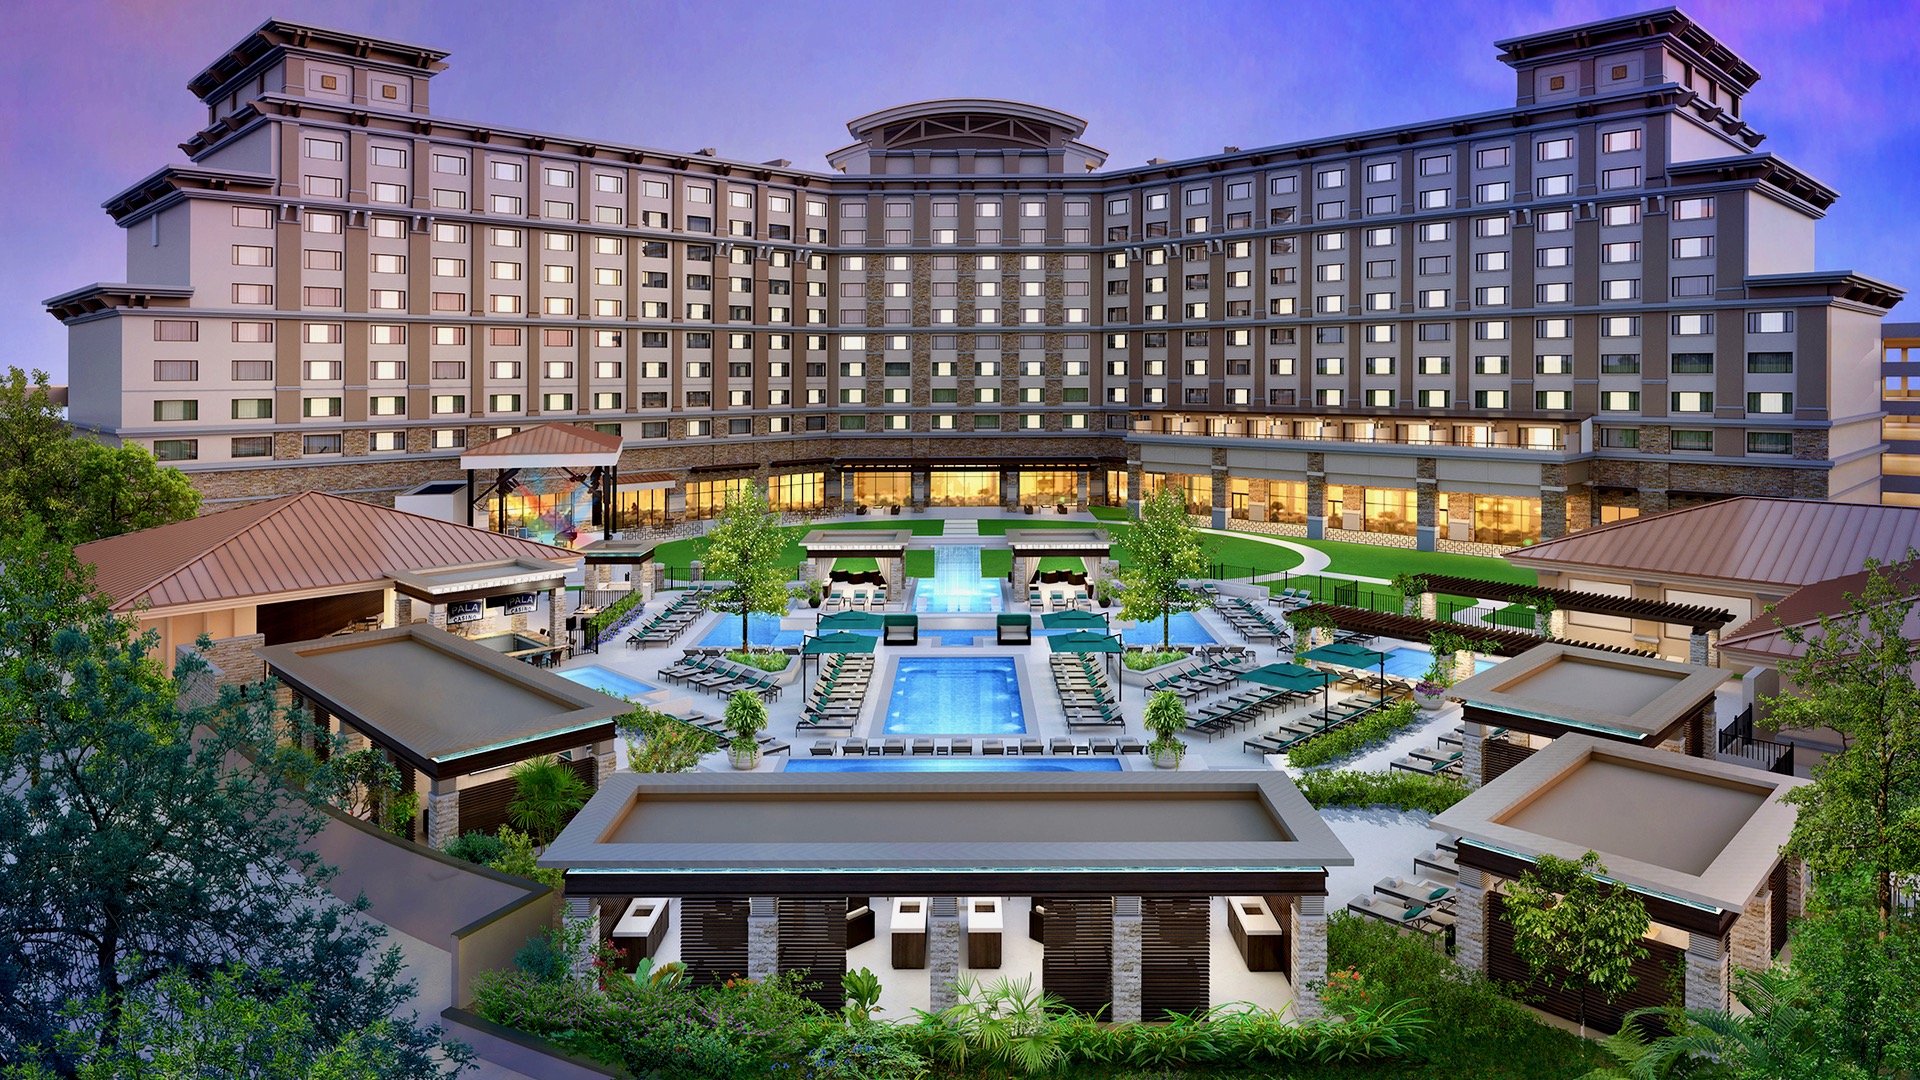 Southern California's Pala Casino Spa & Resort Unveils Expansion